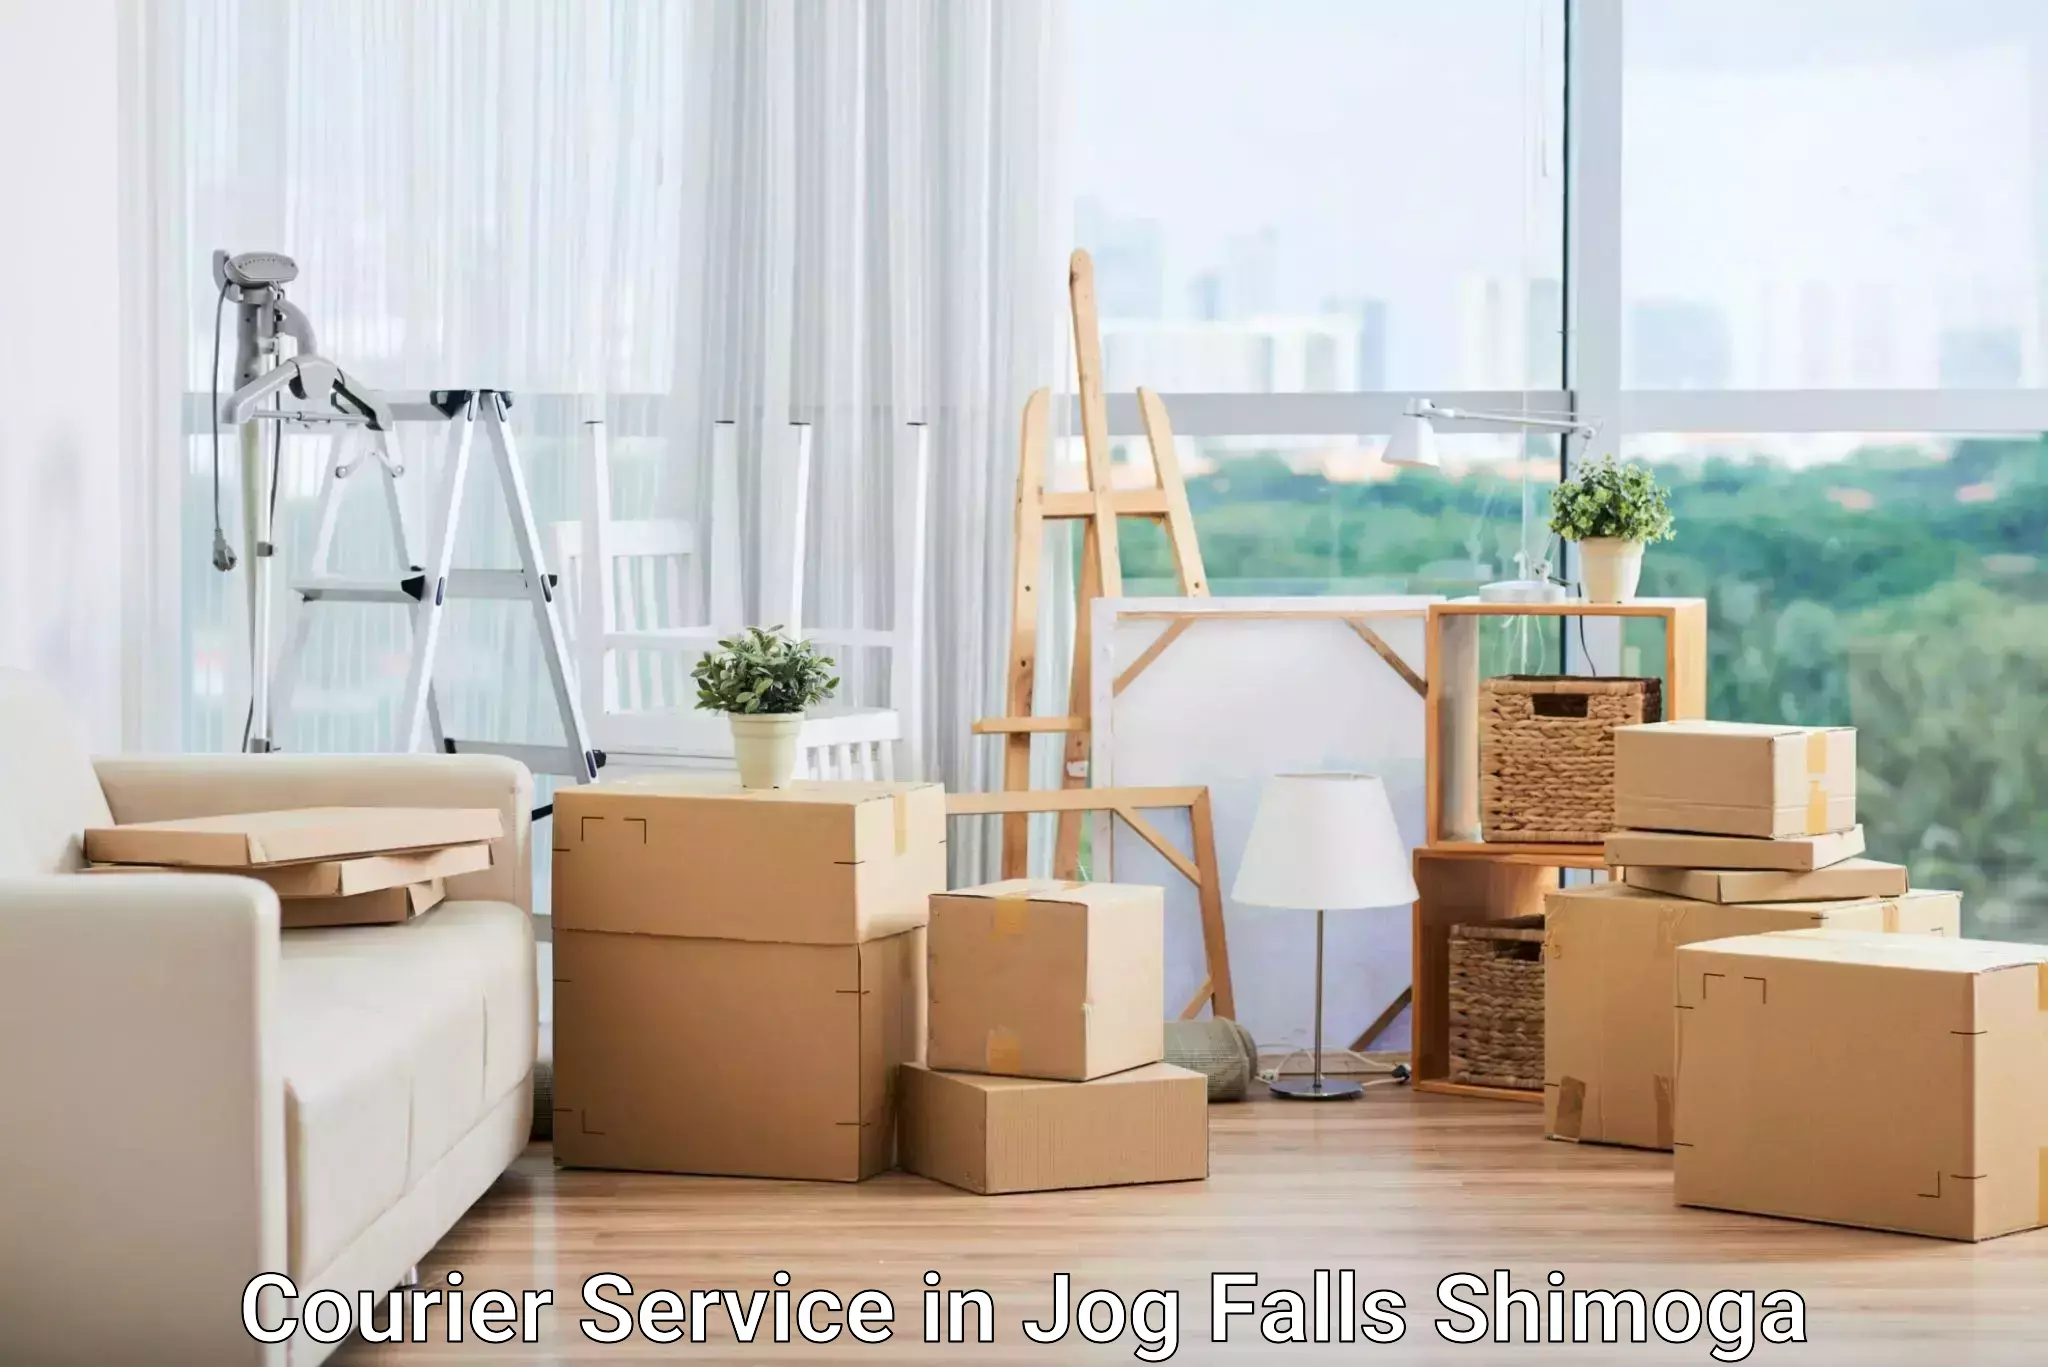 Reliable freight solutions in Jog Falls Shimoga